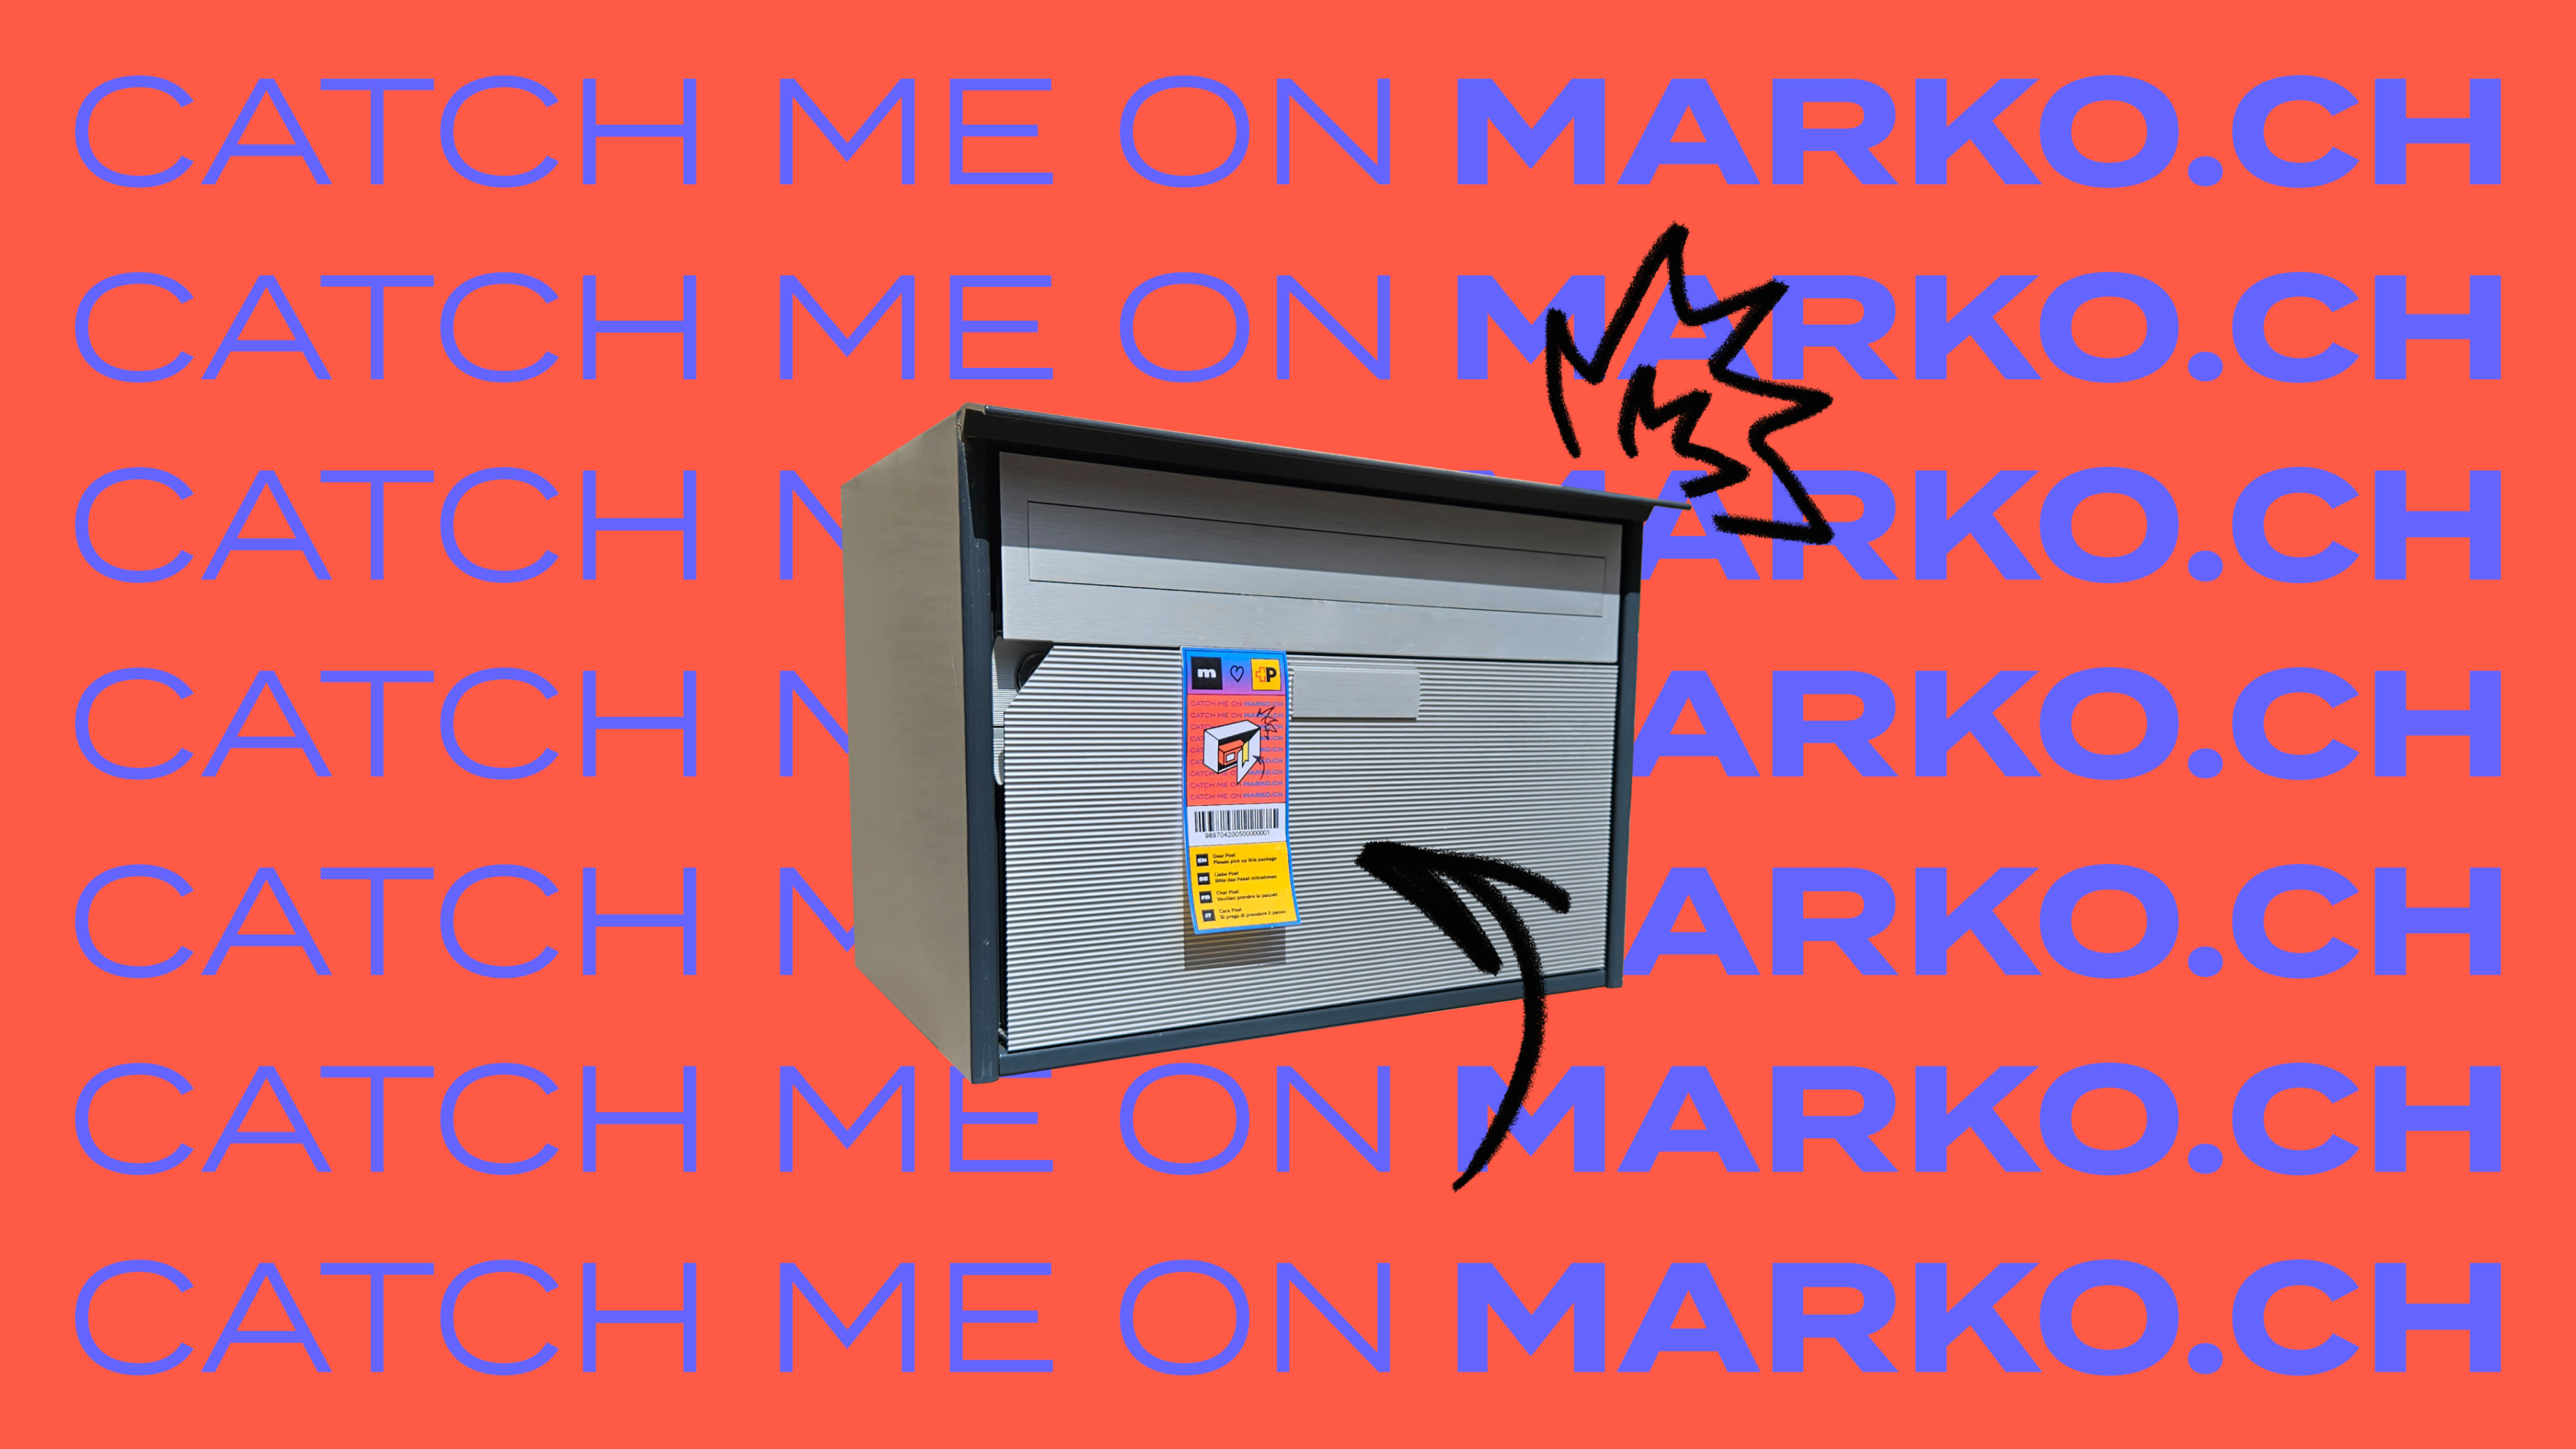 Postbox with marko easy shipping tag